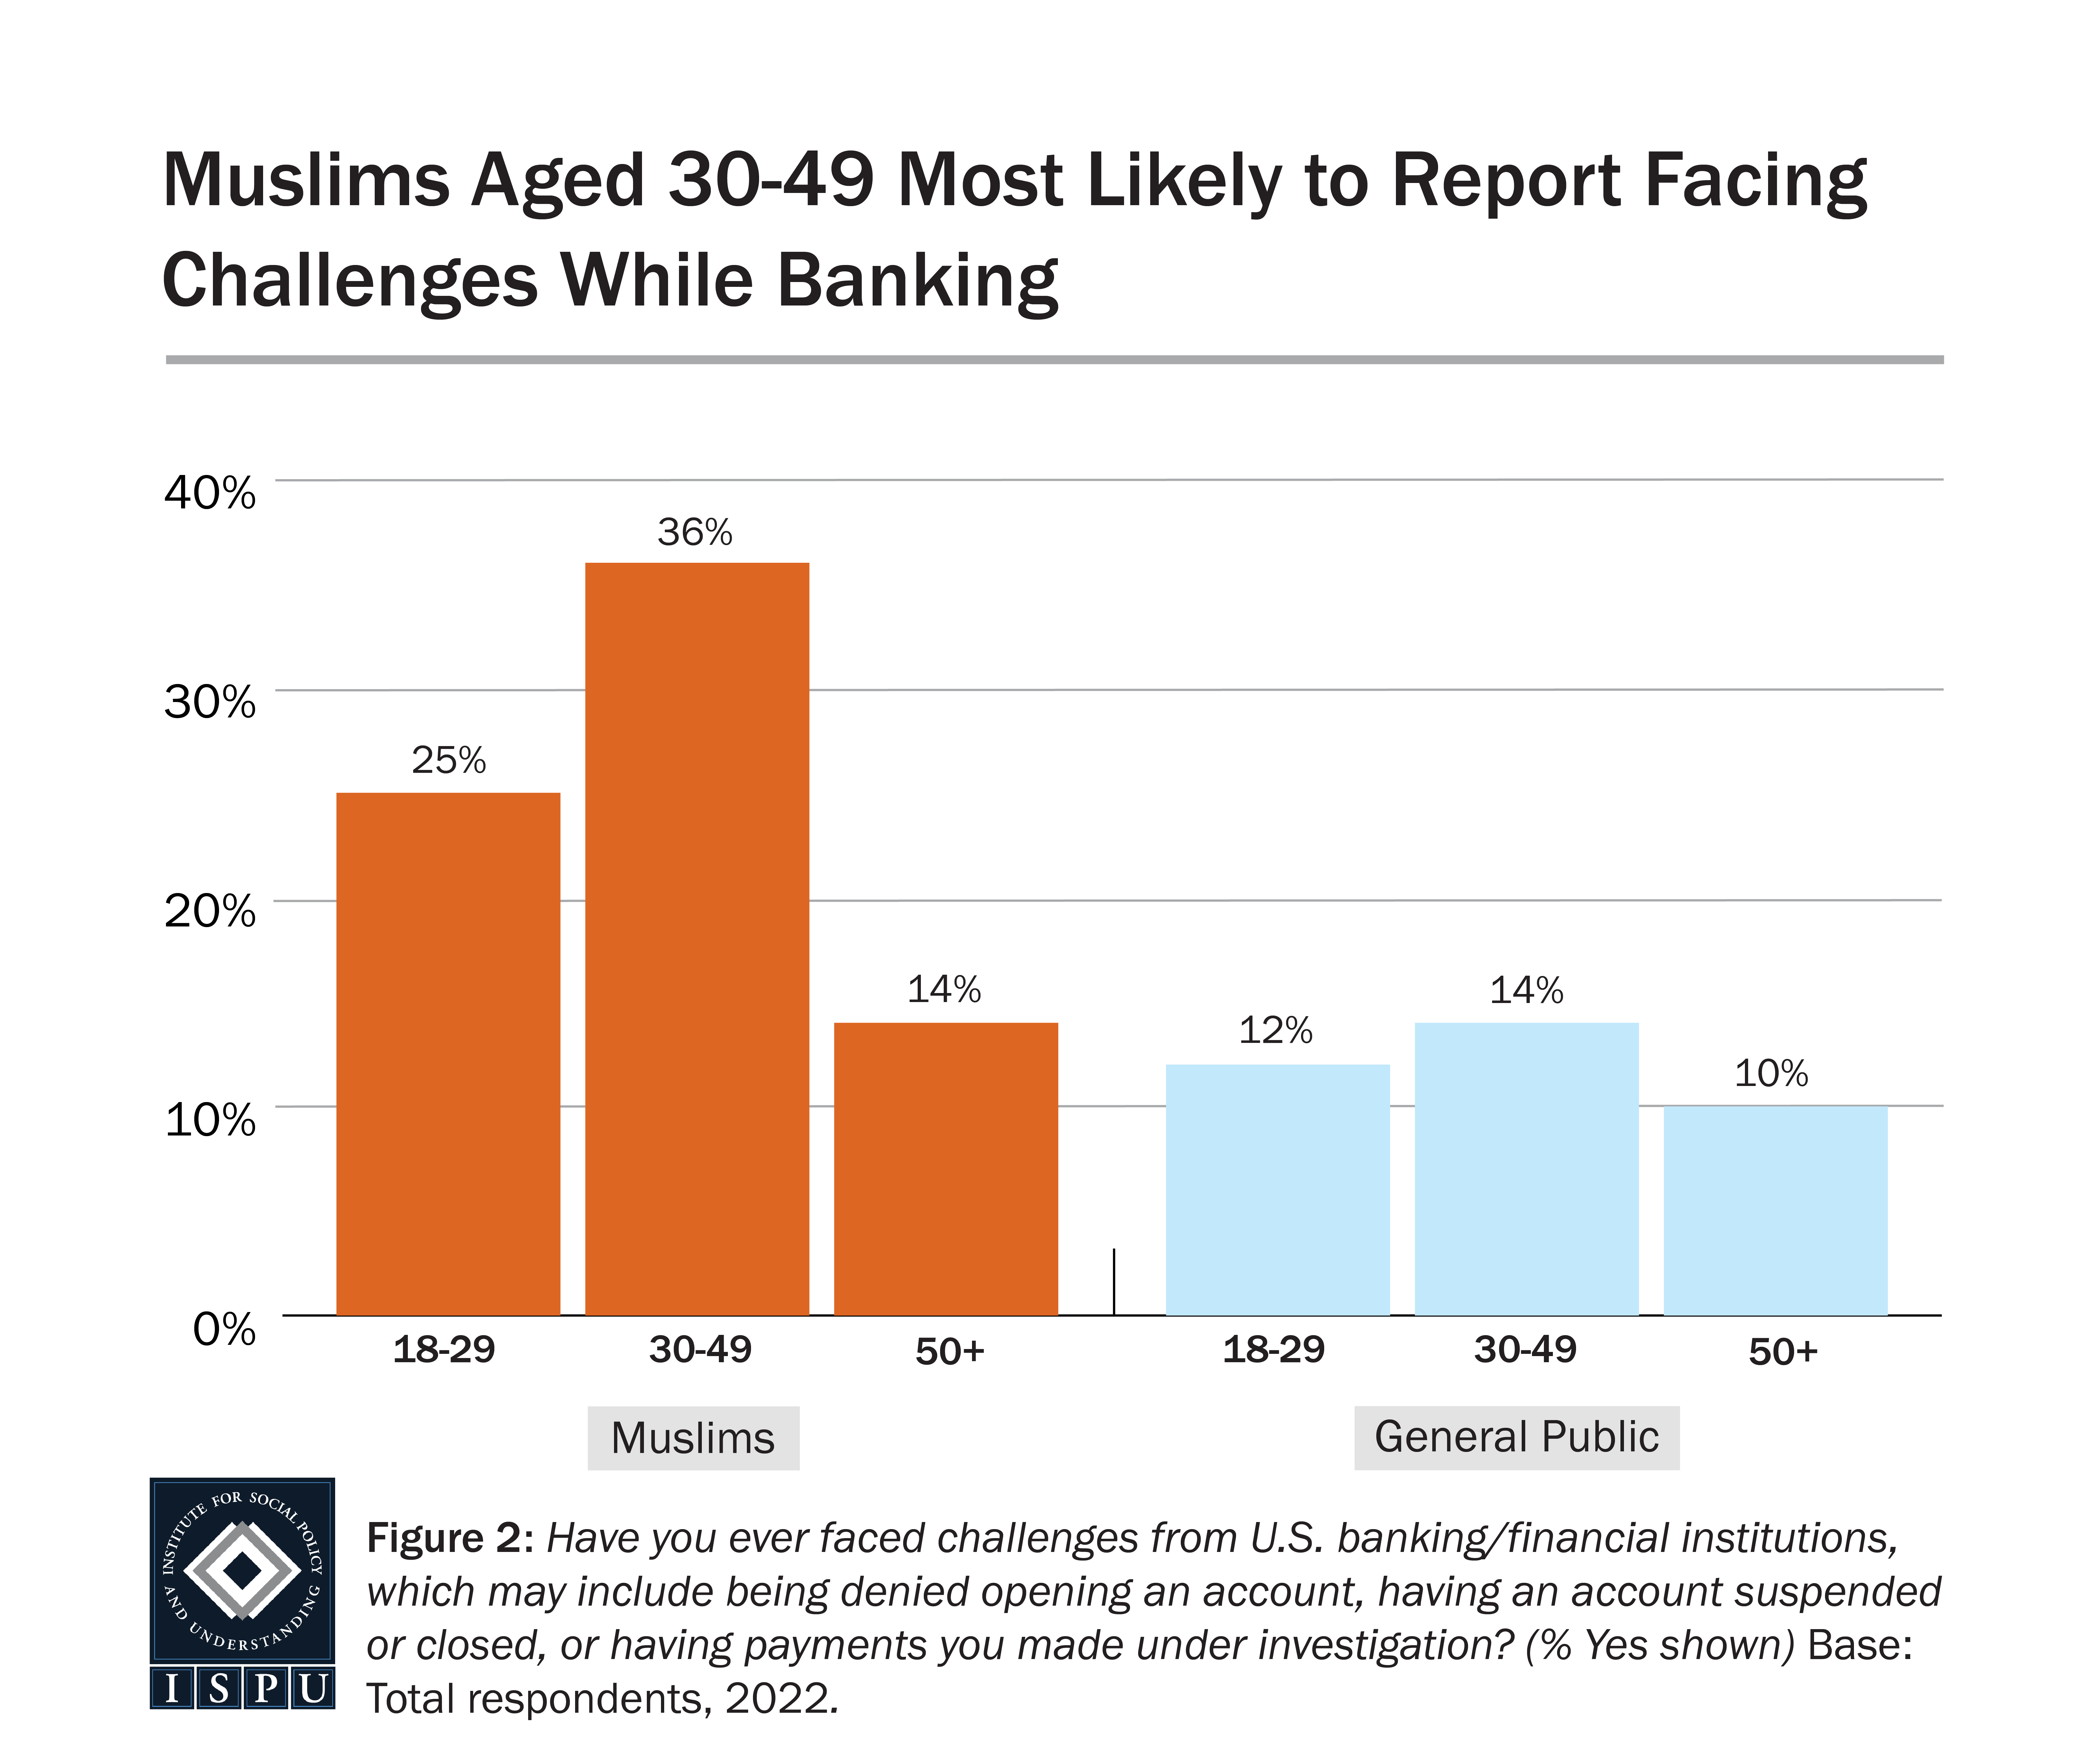 A bar graph showing the proportion of 18-29 year olds, 30-49 year olds, and 50+ year olds among Muslims and the general public who reported facing challenges while banking.